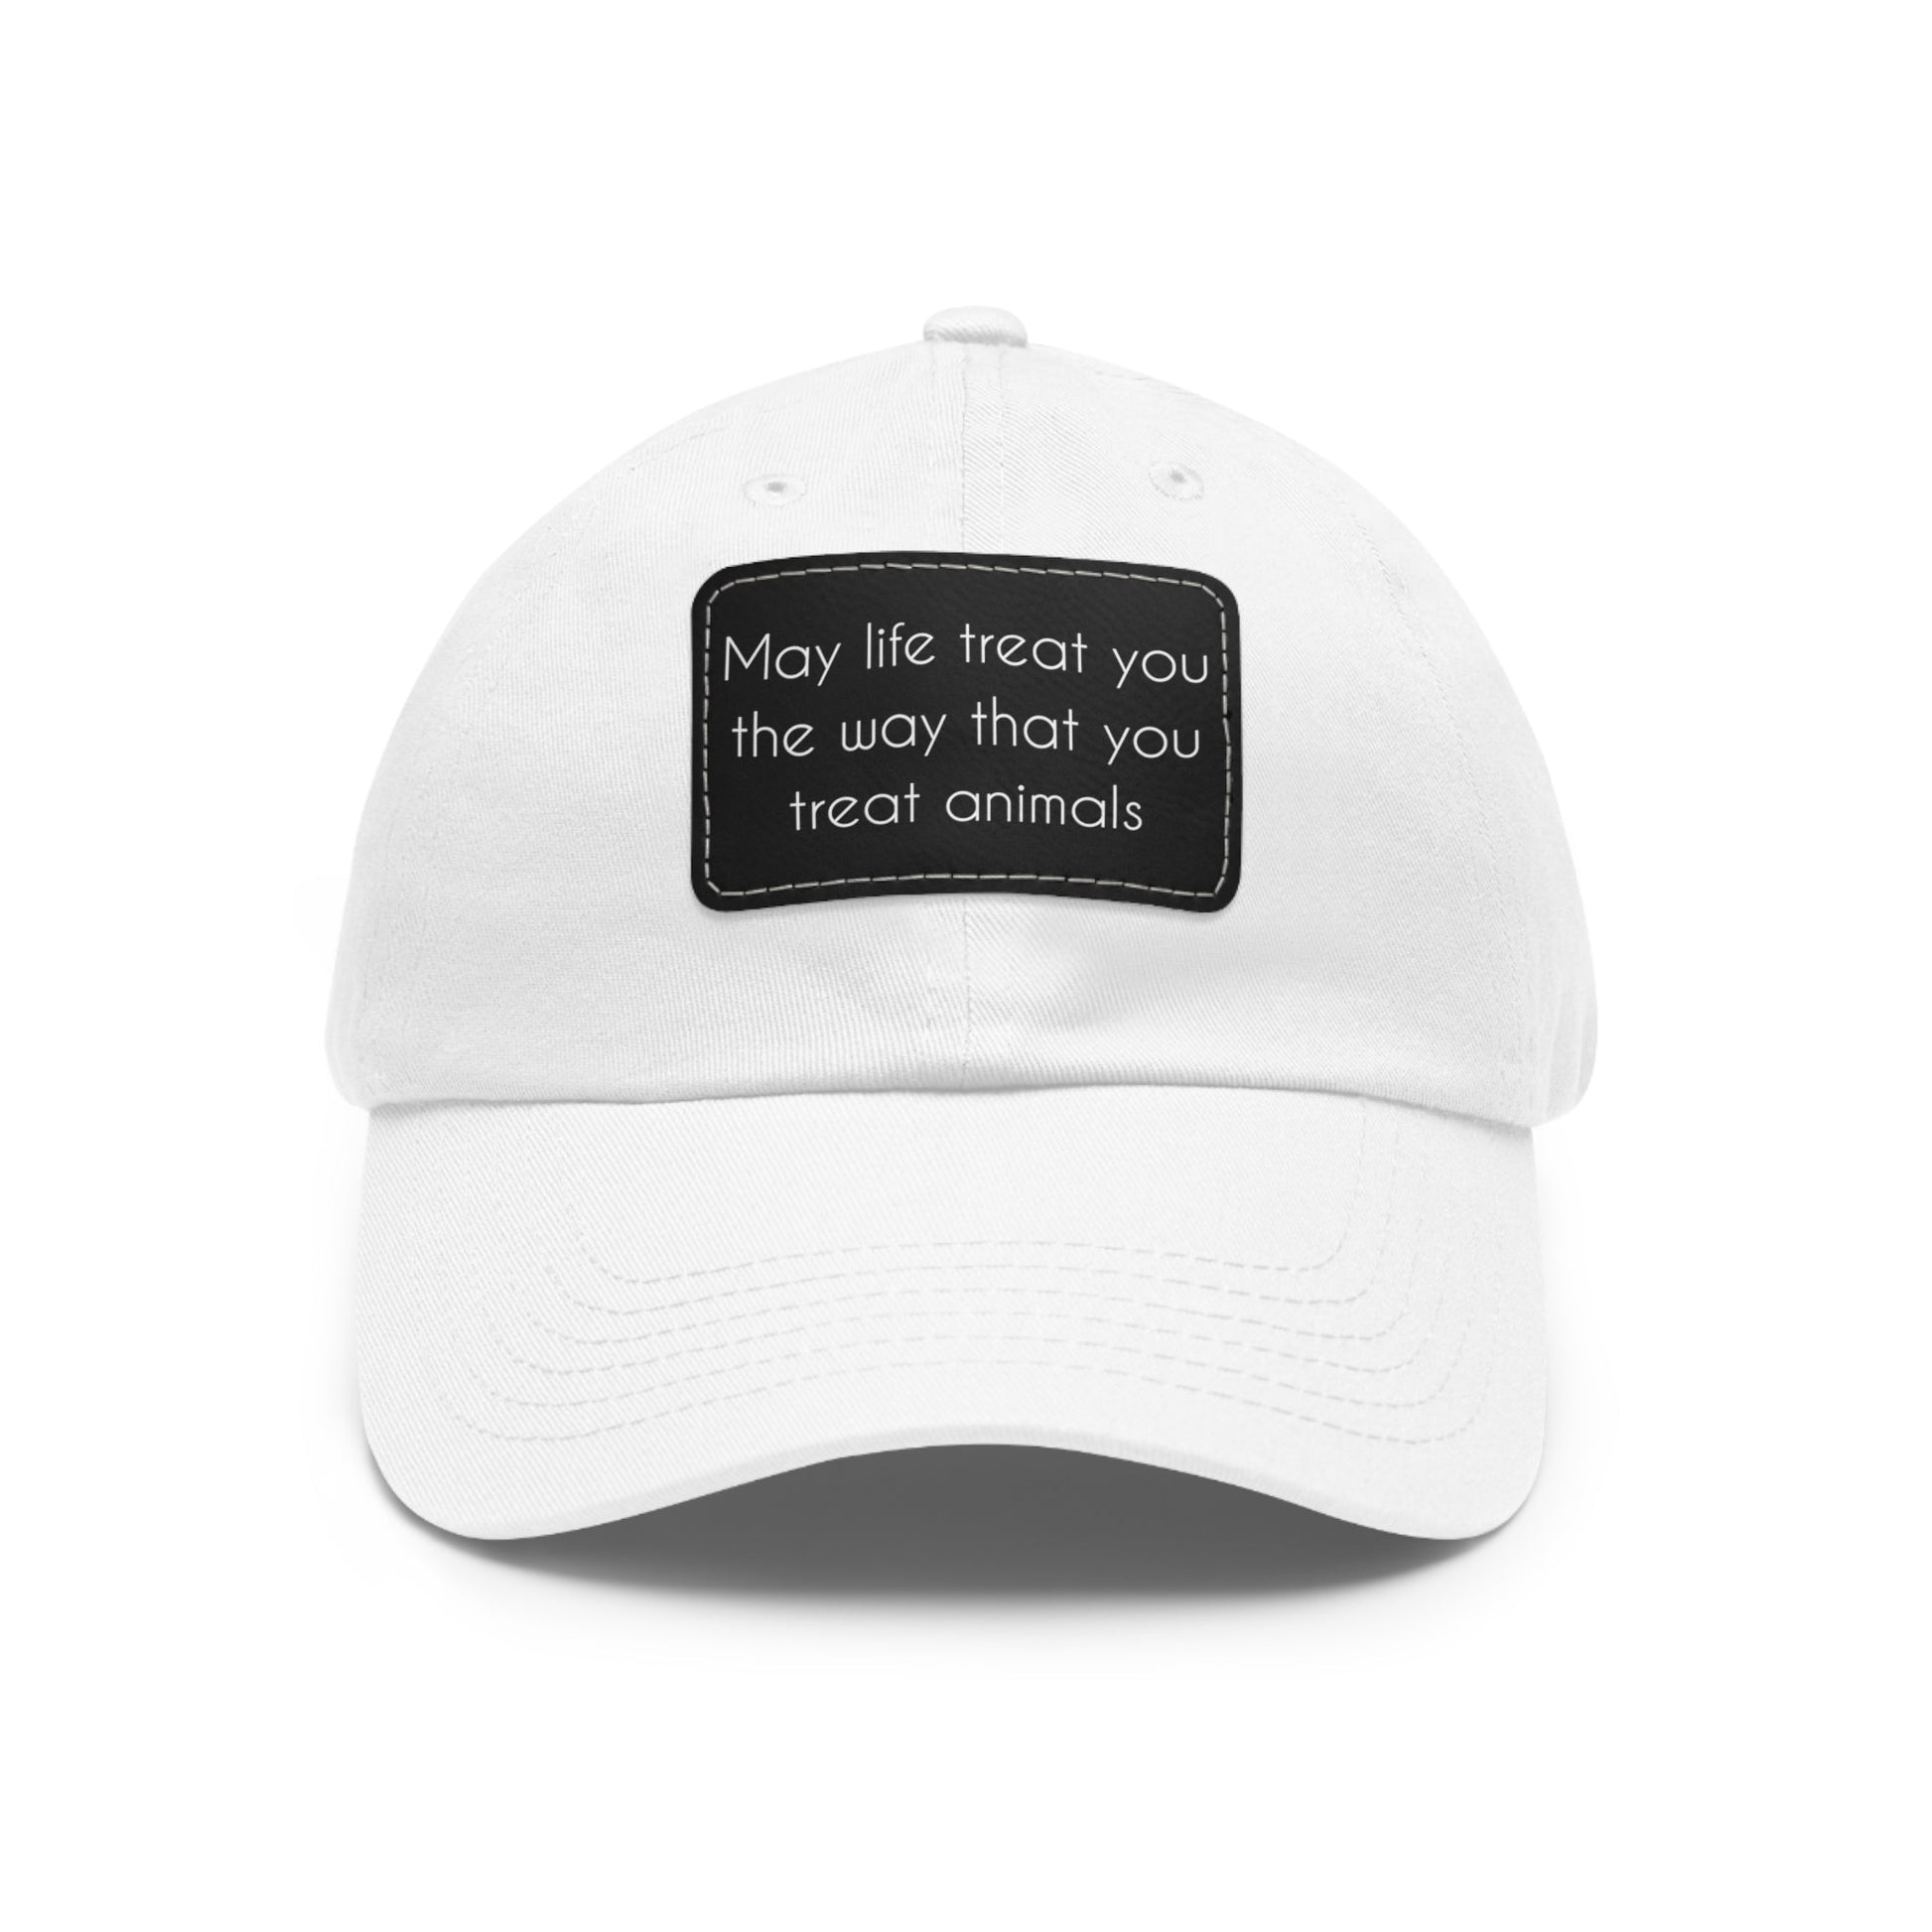 May Life Treat You The Way That You Treat Animals | Dad Hat - Detezi Designs-44822200031625444978